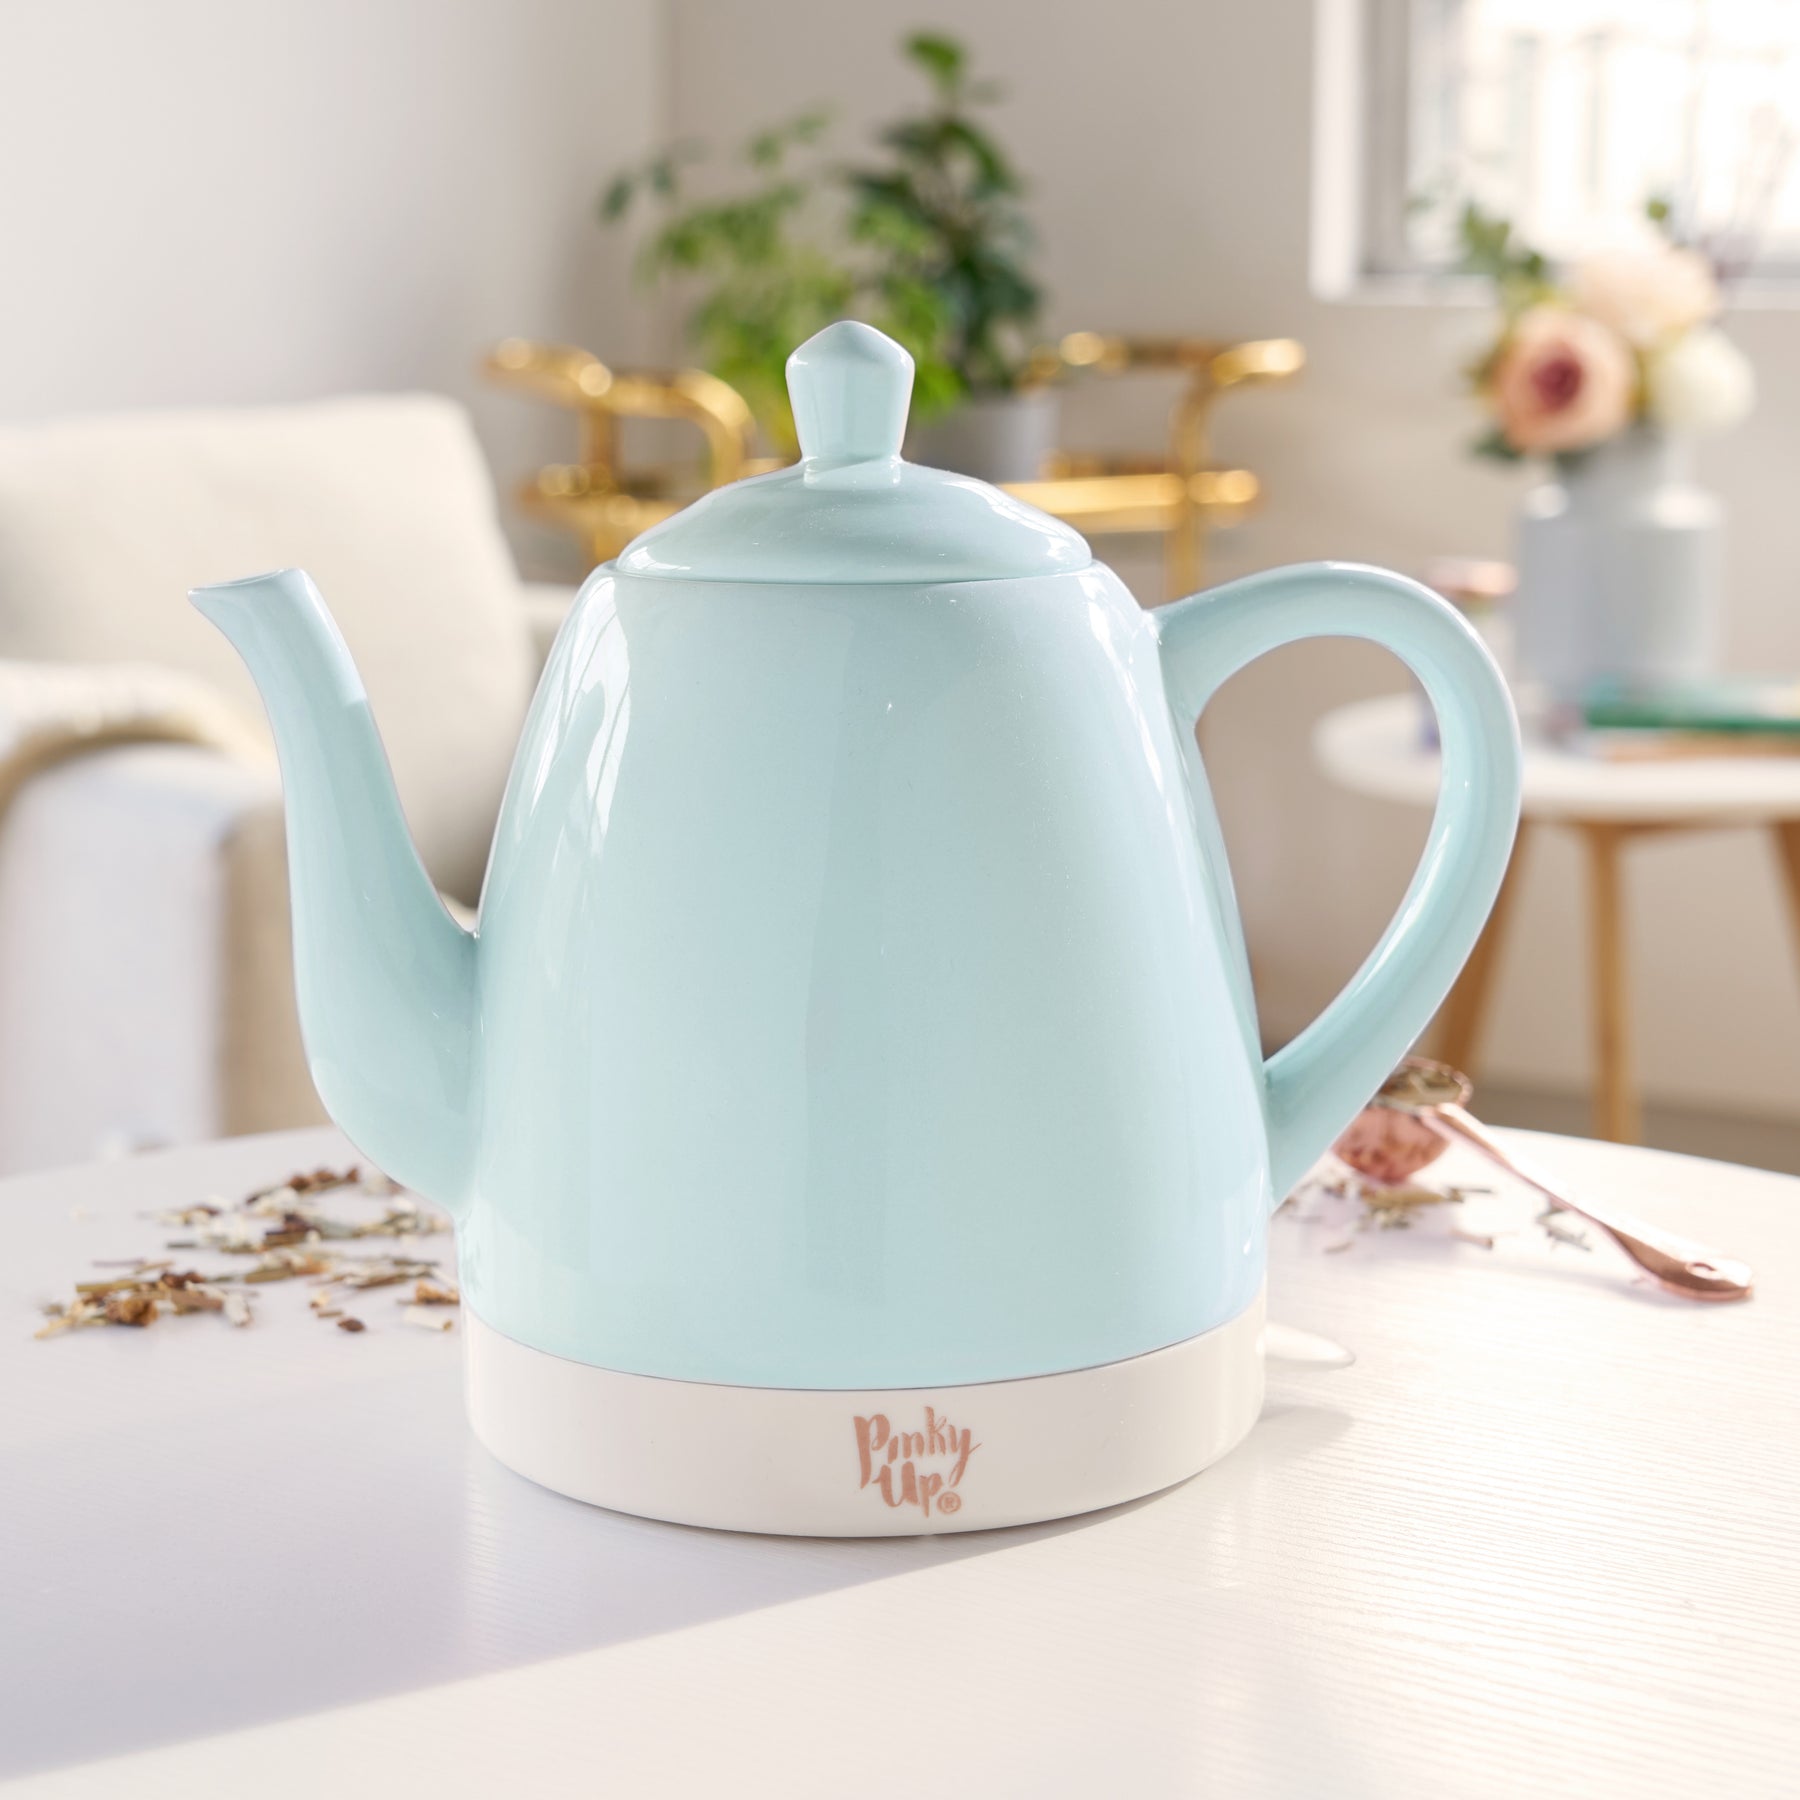 Toptier Electric Ceramic Tea Kettle, Boil Water Quickly and Easily,  Detachable Swivel Base & Boil Dry Protection, Carefree Auto Shut Off, 1 L,  White